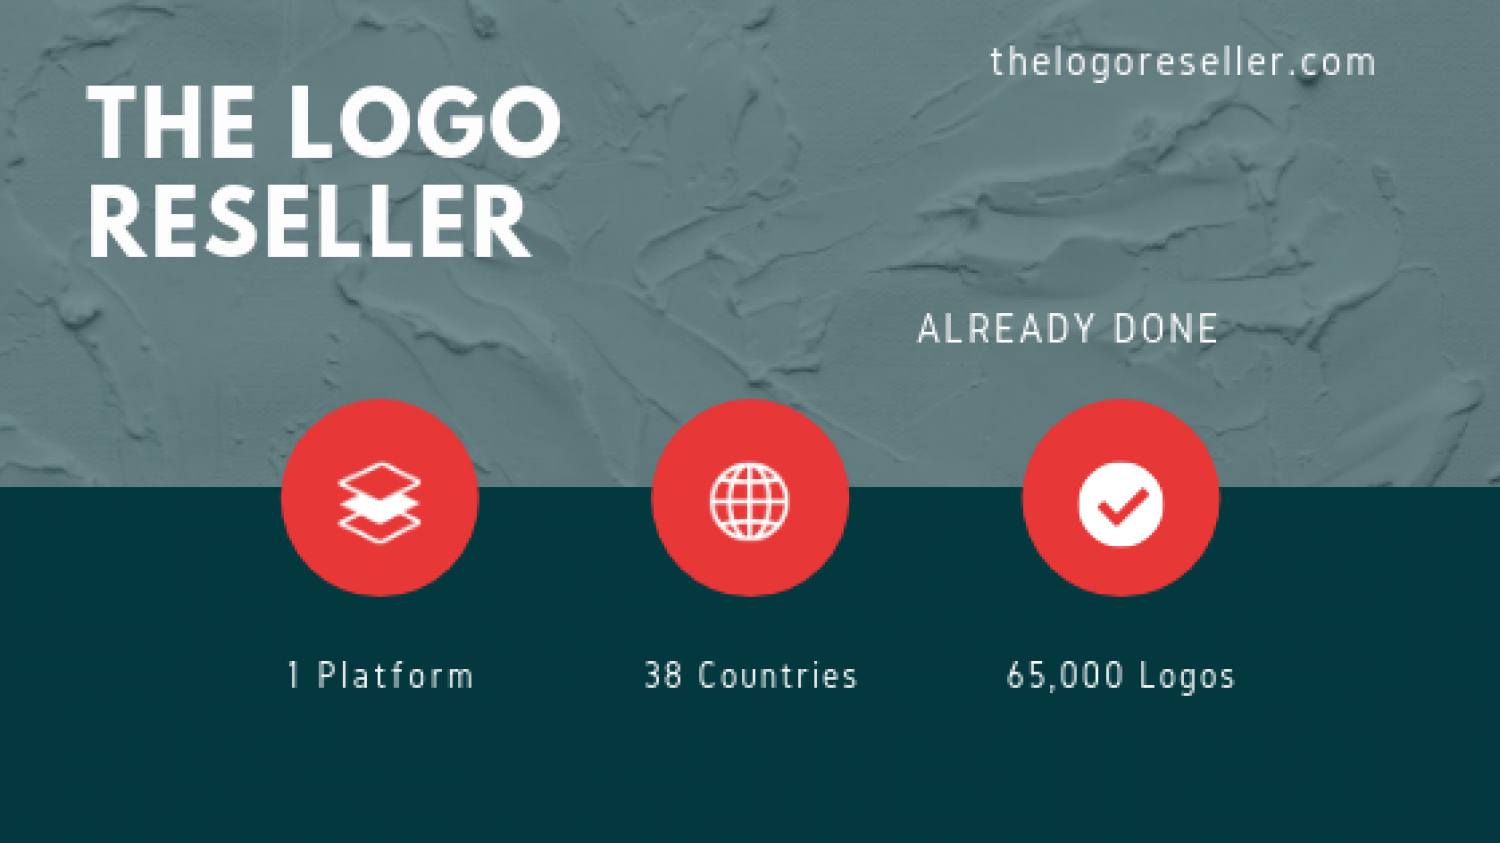 Avail Logo Design Services With Many Perks; Contact The Logo Reseller Infographic